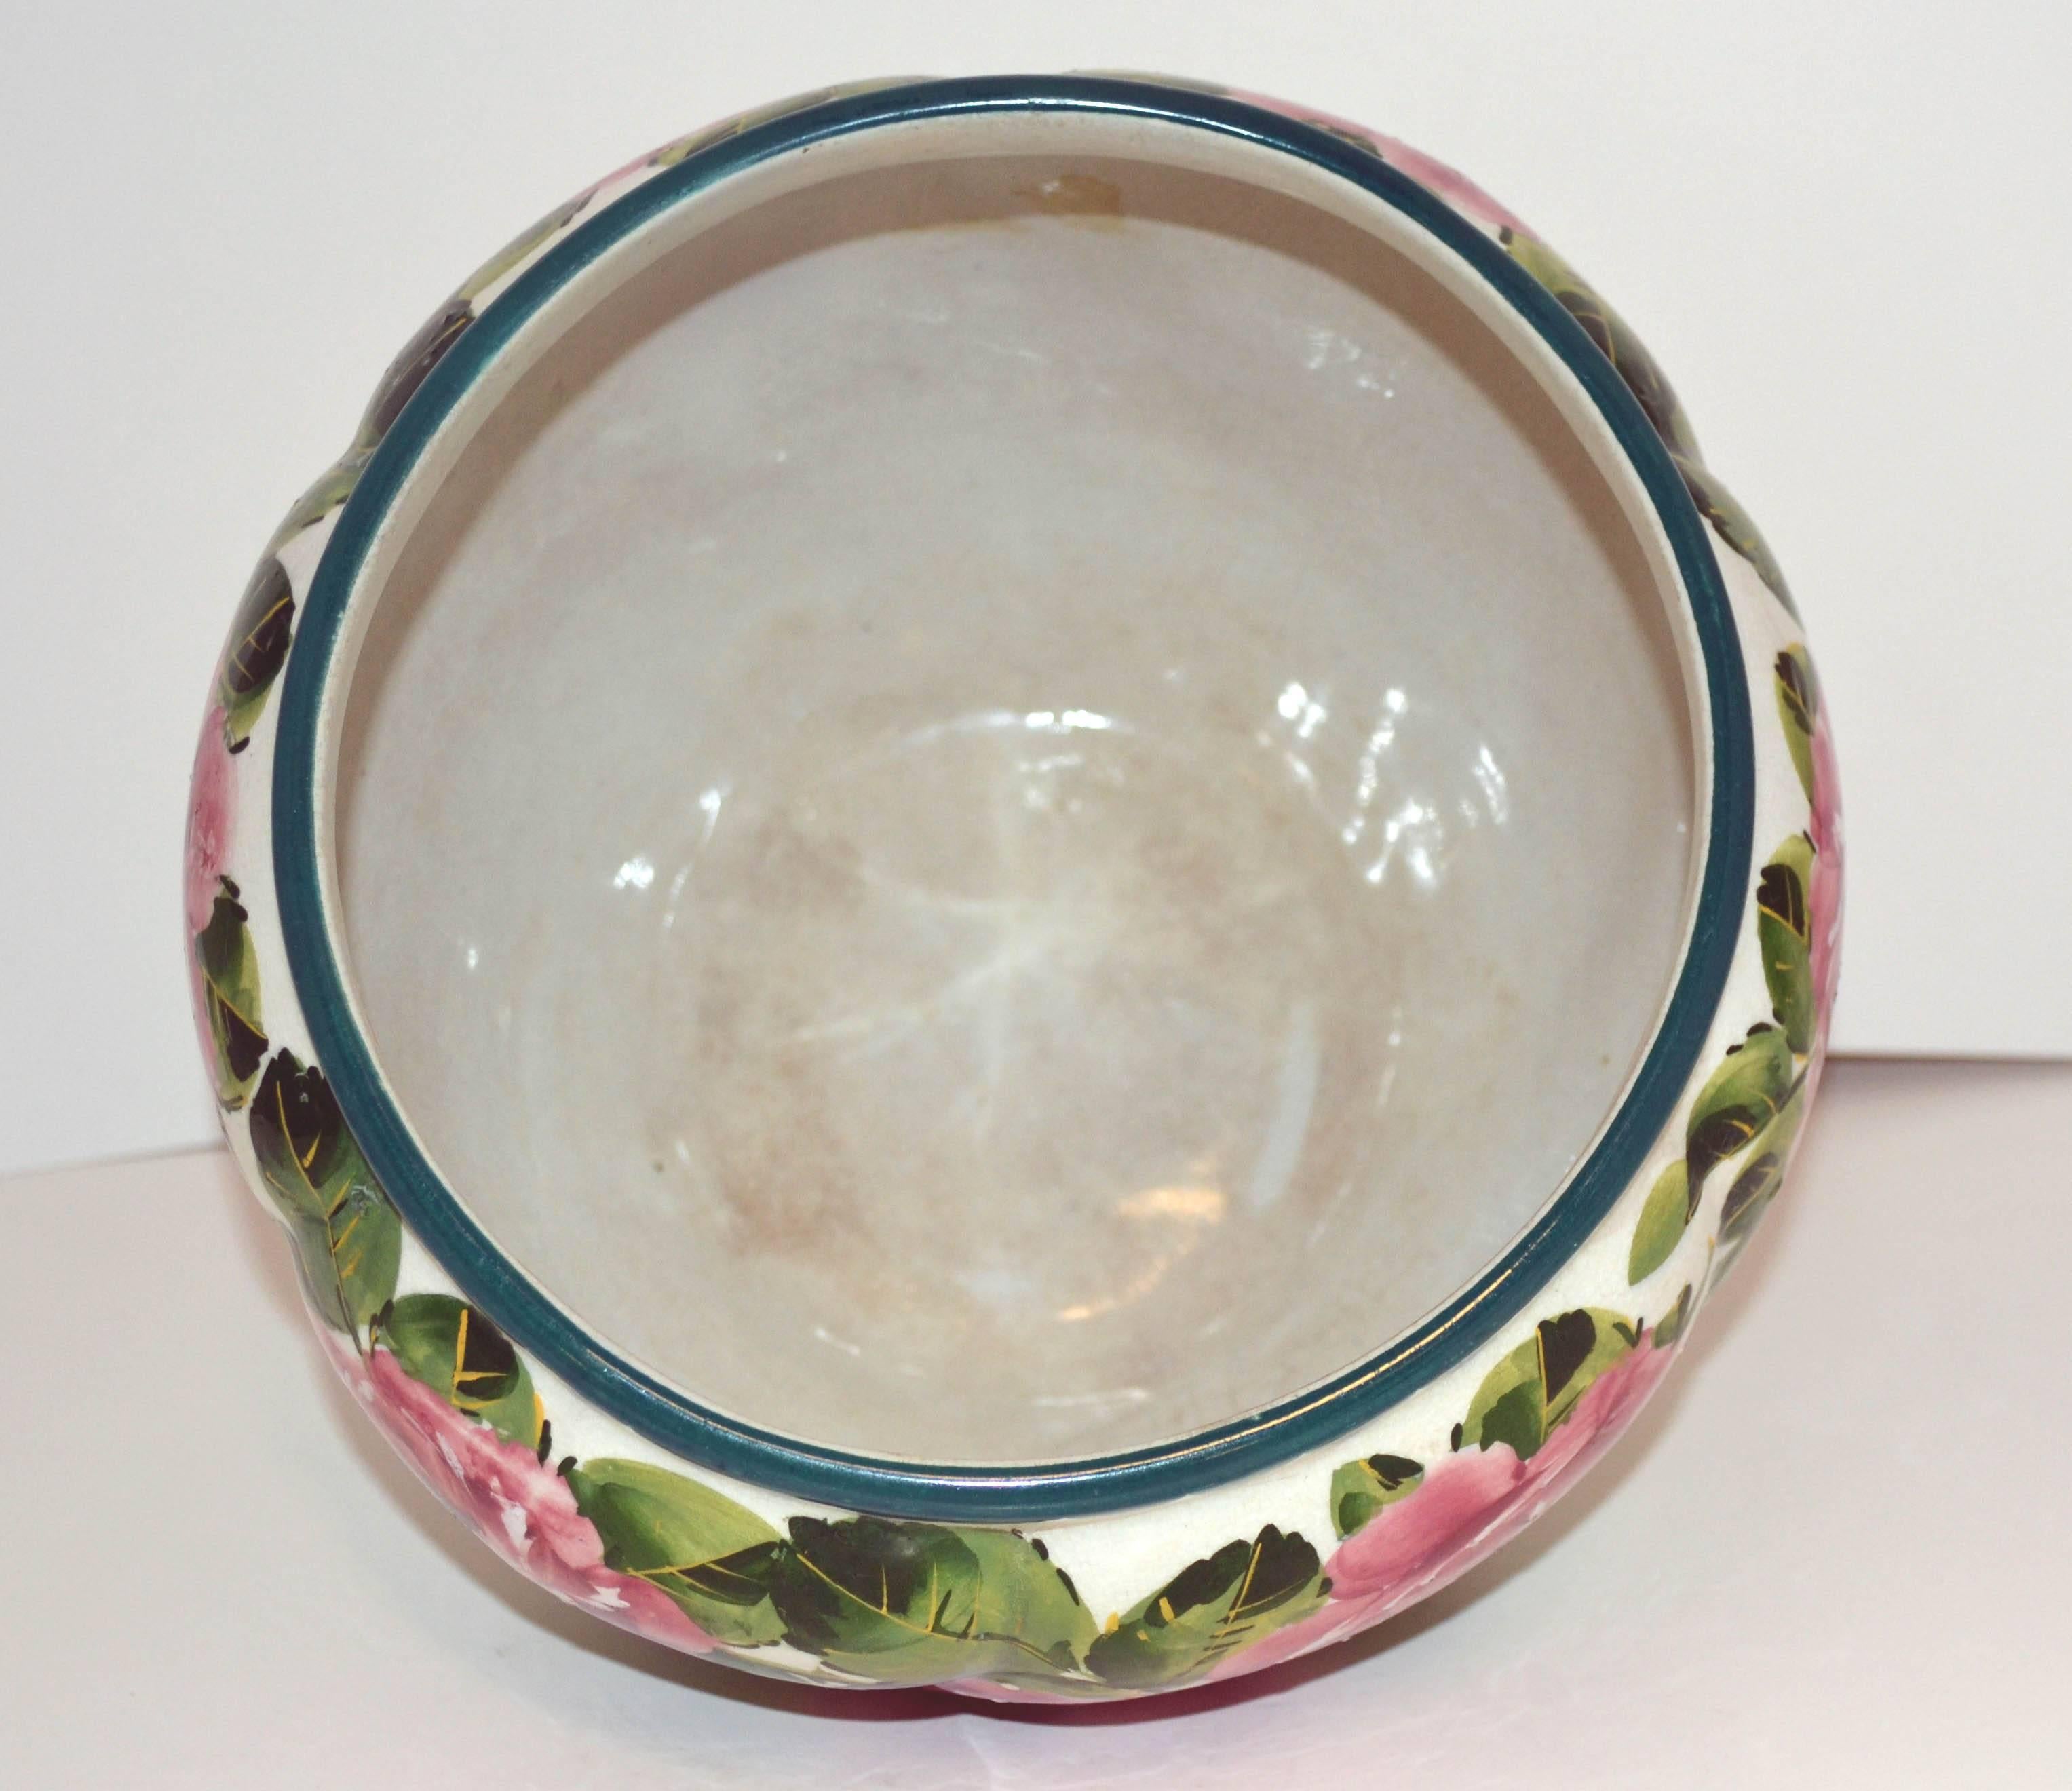 This beautiful late 19th century combe Jardinière is decorated in Wemyss's characteristic hand-painted cabbage roses and scalloped painted rim, circa 1880. Marked "Weymss" on bottom. Size is 6.75" H x 9.50" W.
One of several